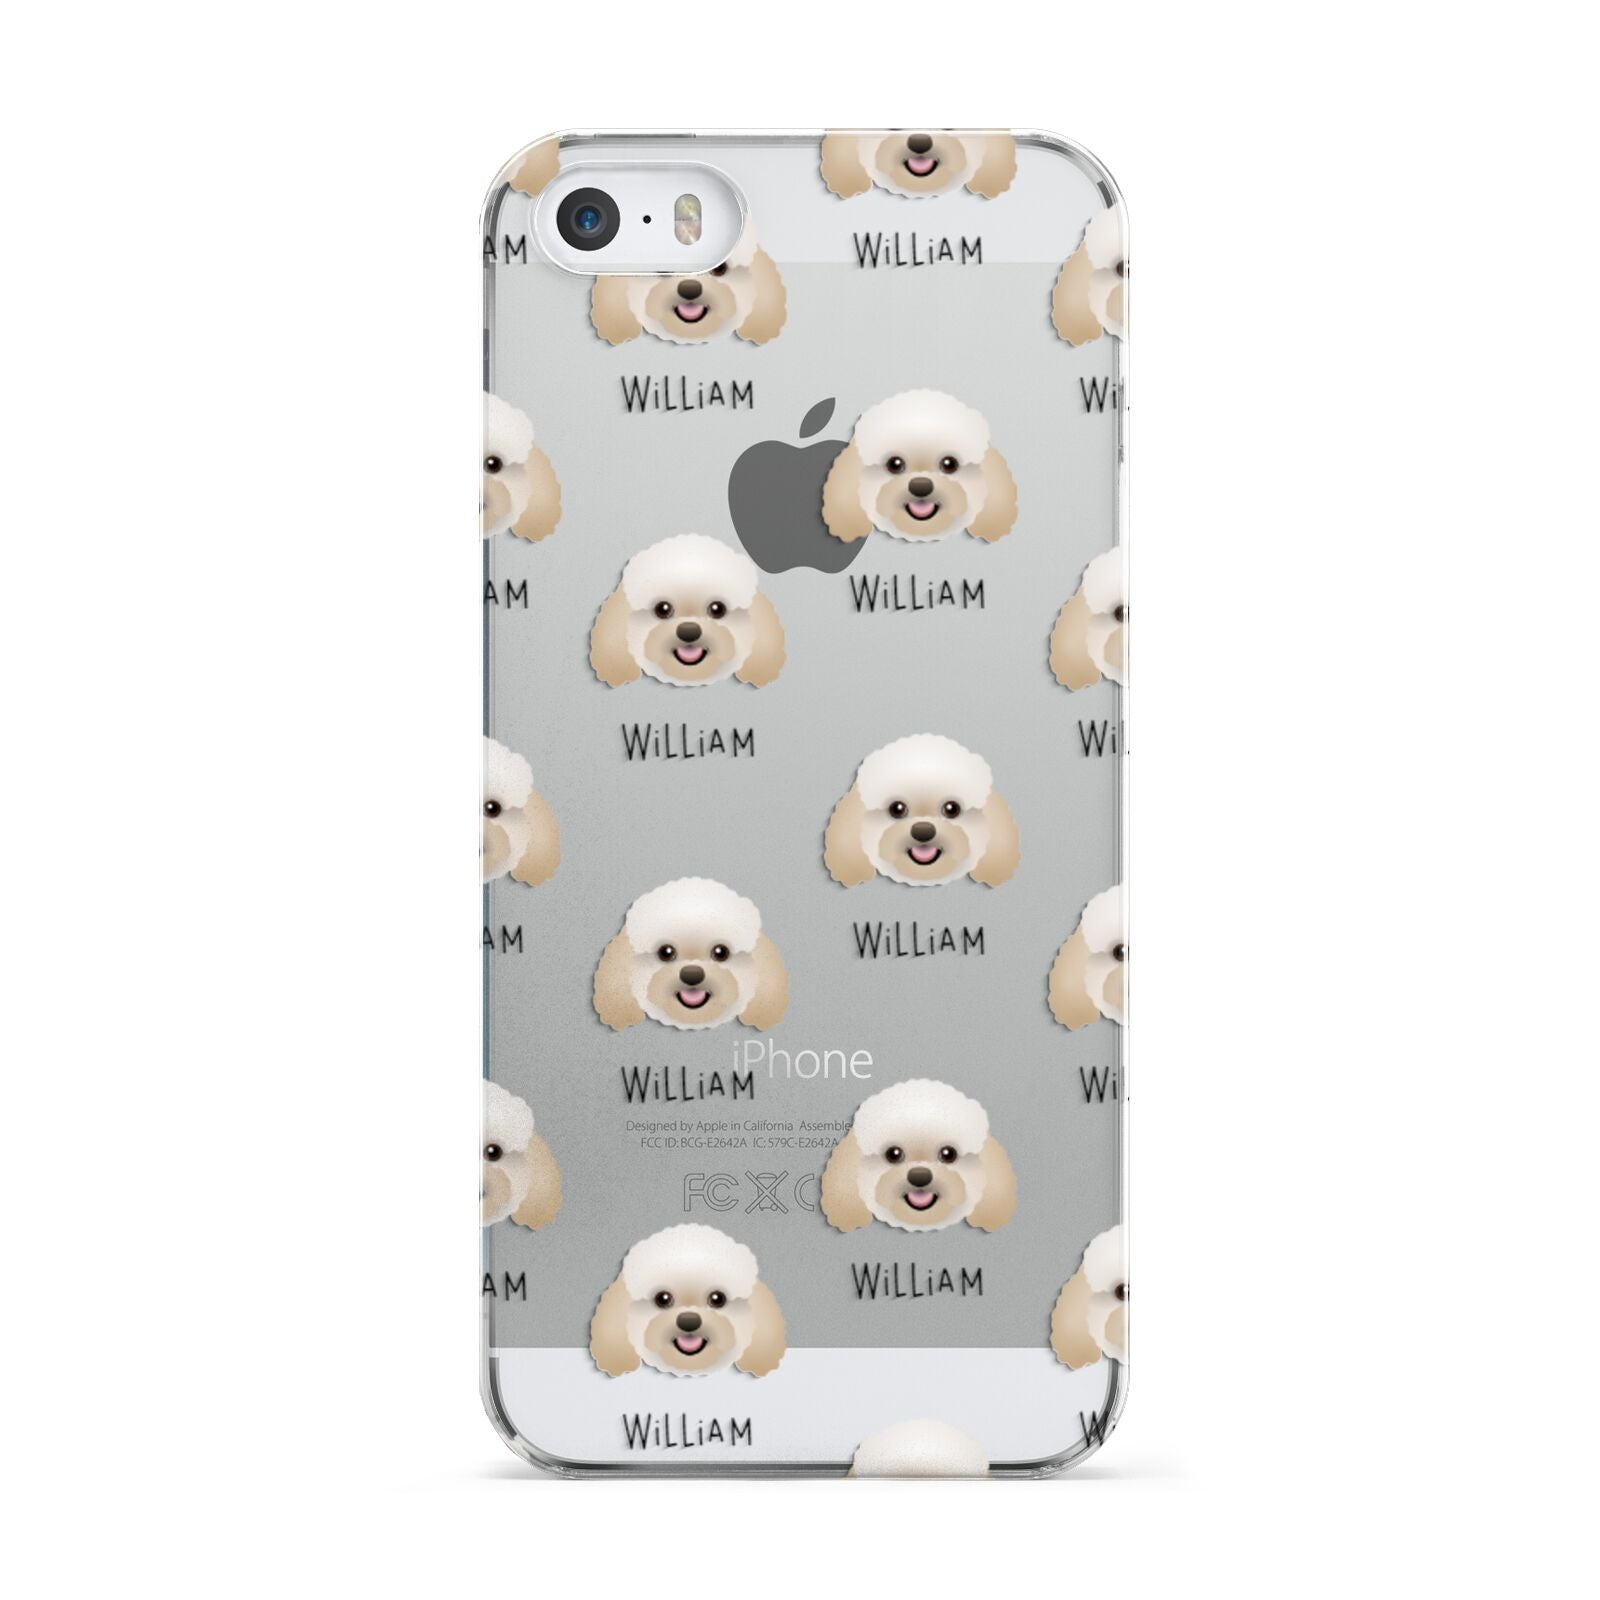 Bich poo Icon with Name Apple iPhone 5 Case